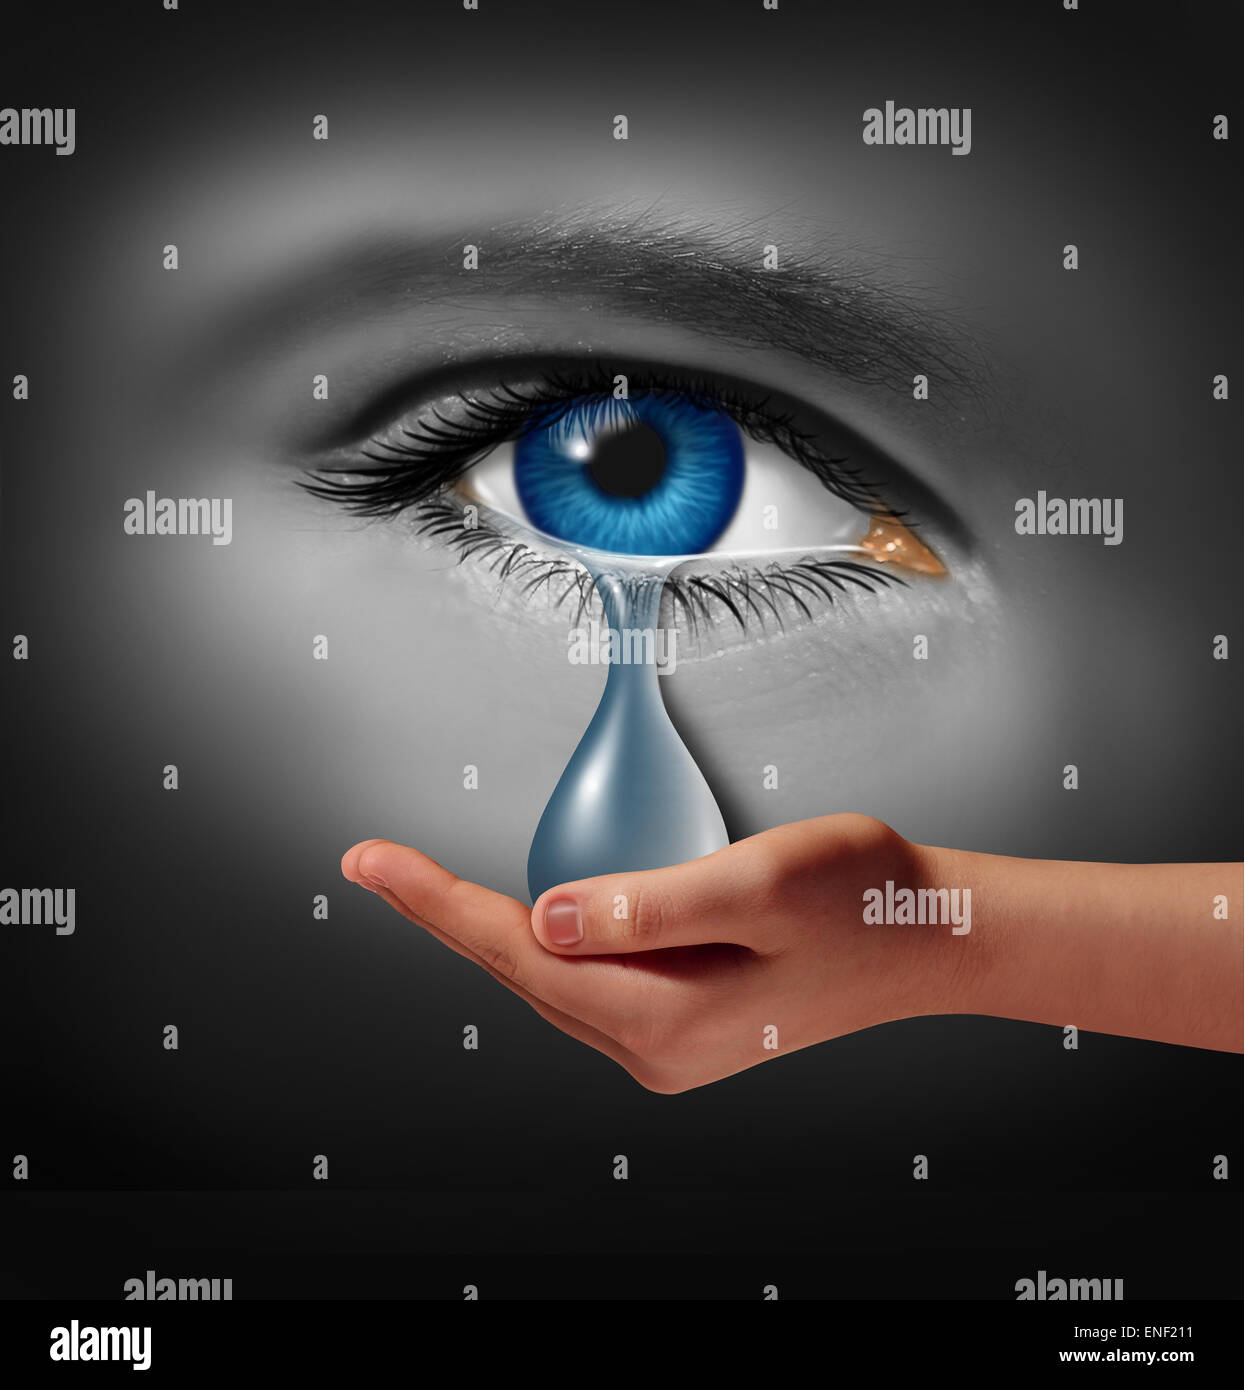 Depression support and therapy concept as a depressed human eye crying a tear held by a helping hand as a metaphor for solutions in the the treatment of mental health issues through psychotherapy or medication. Stock Photo